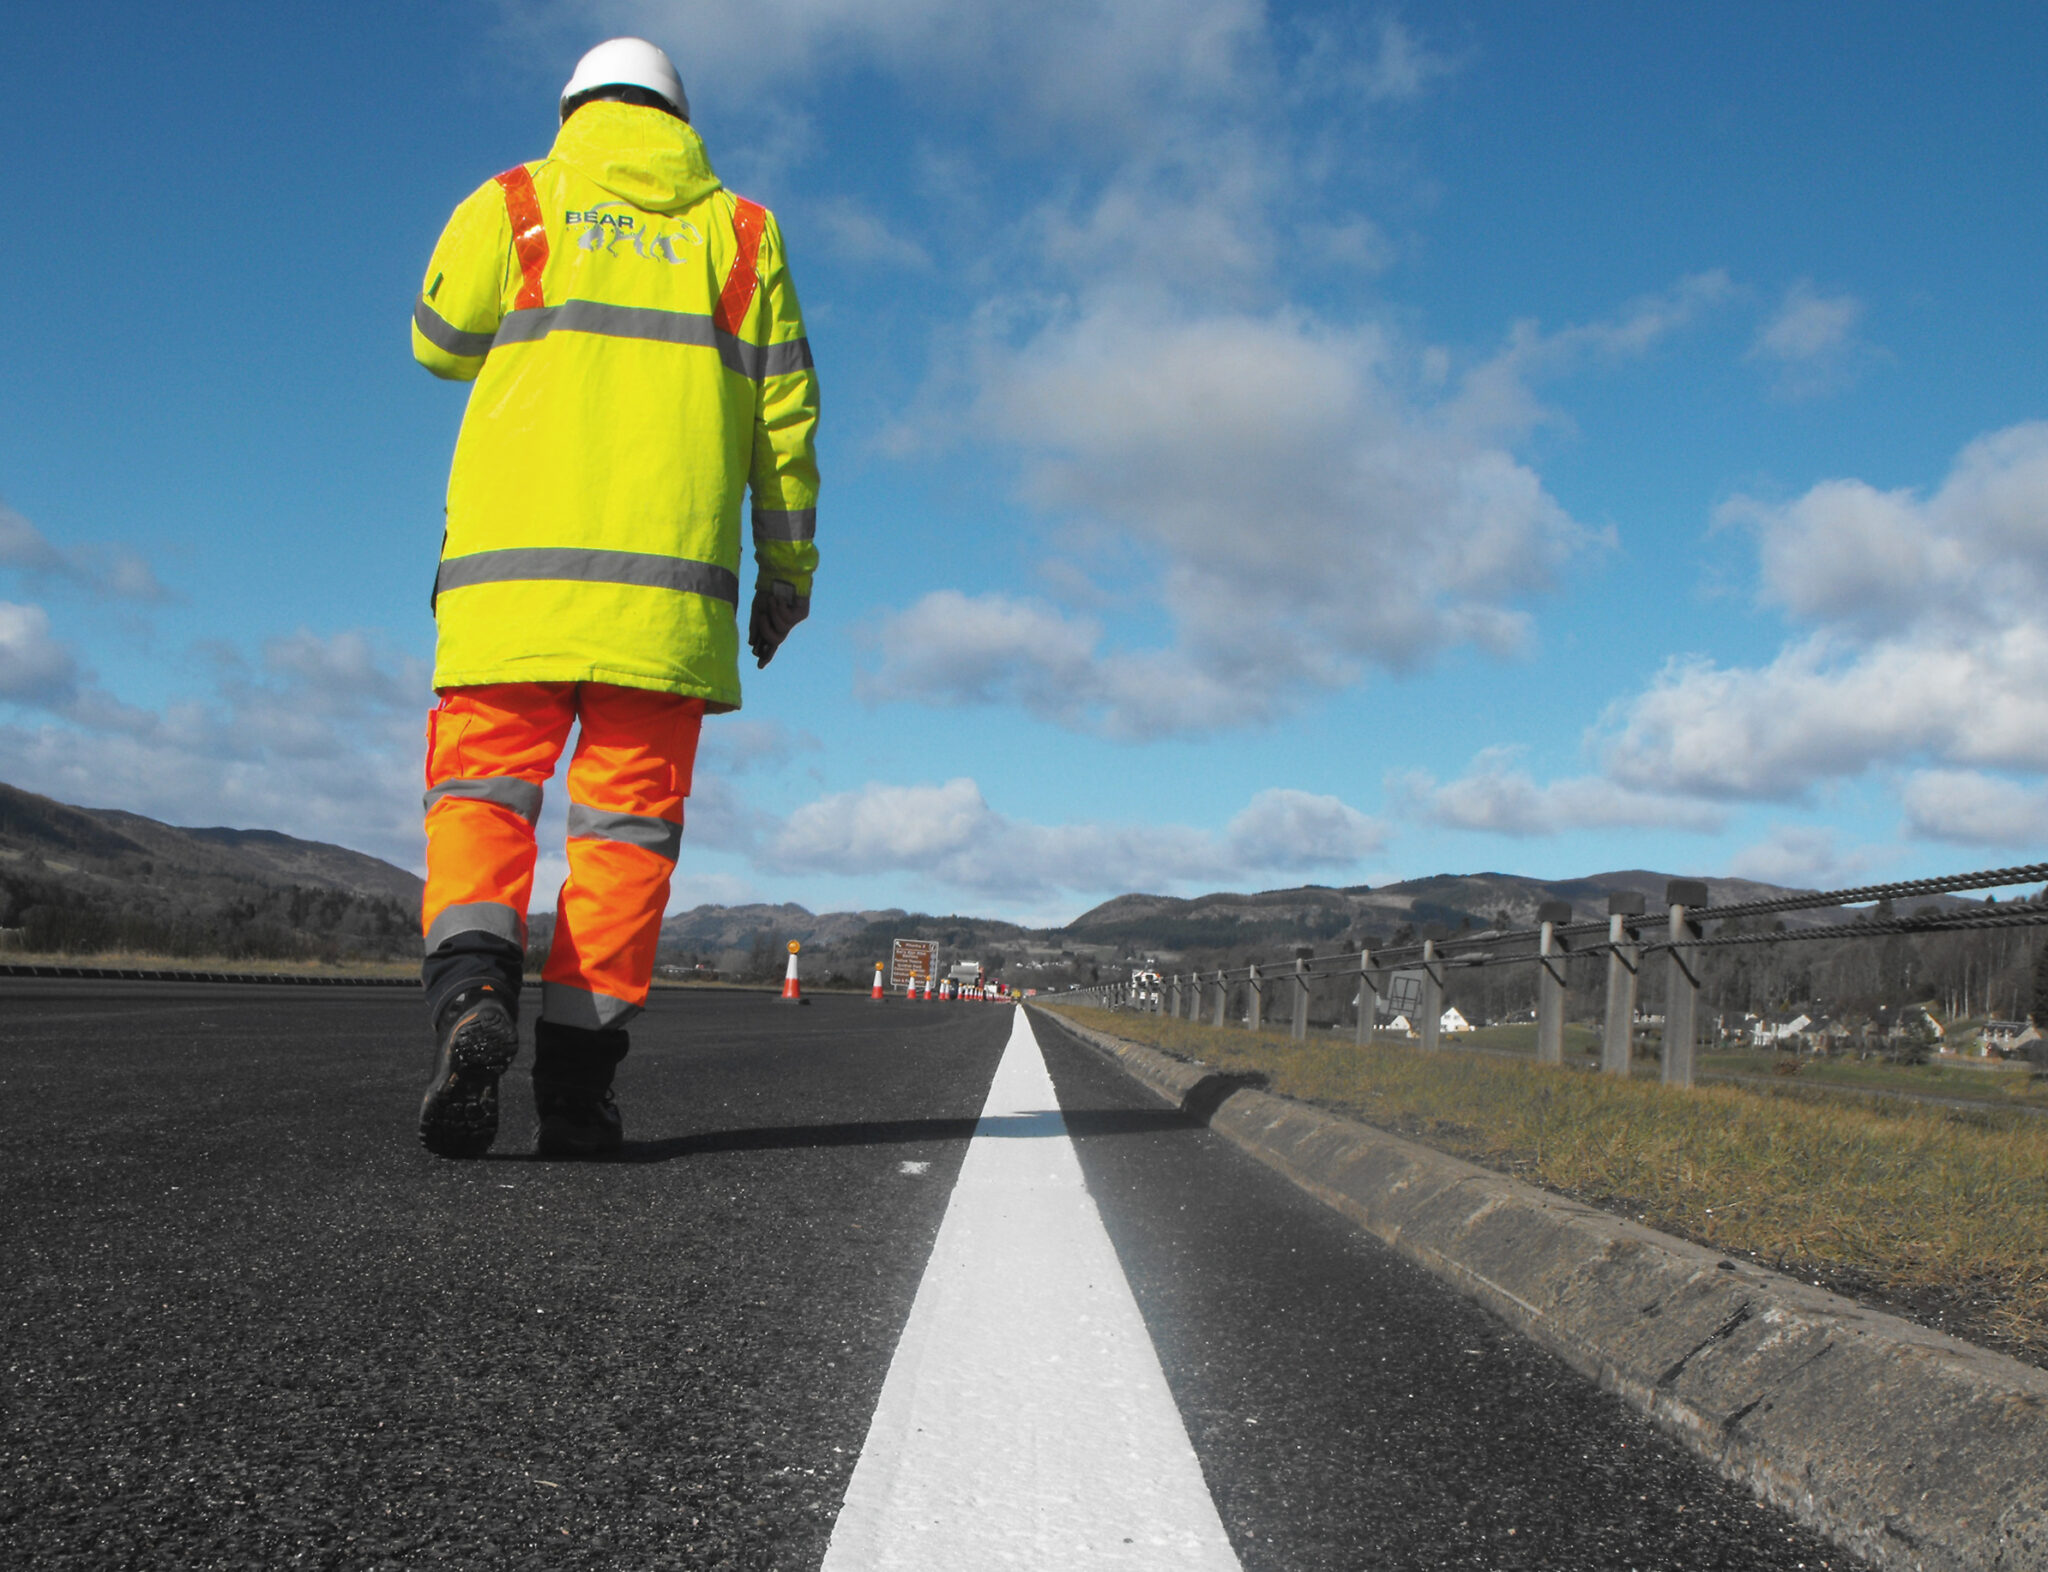 OVERNIGHT SURFACING IMPROVEMENTS PLANNED FOR TWO SECTIONS OF A835 NEAR TARVIE